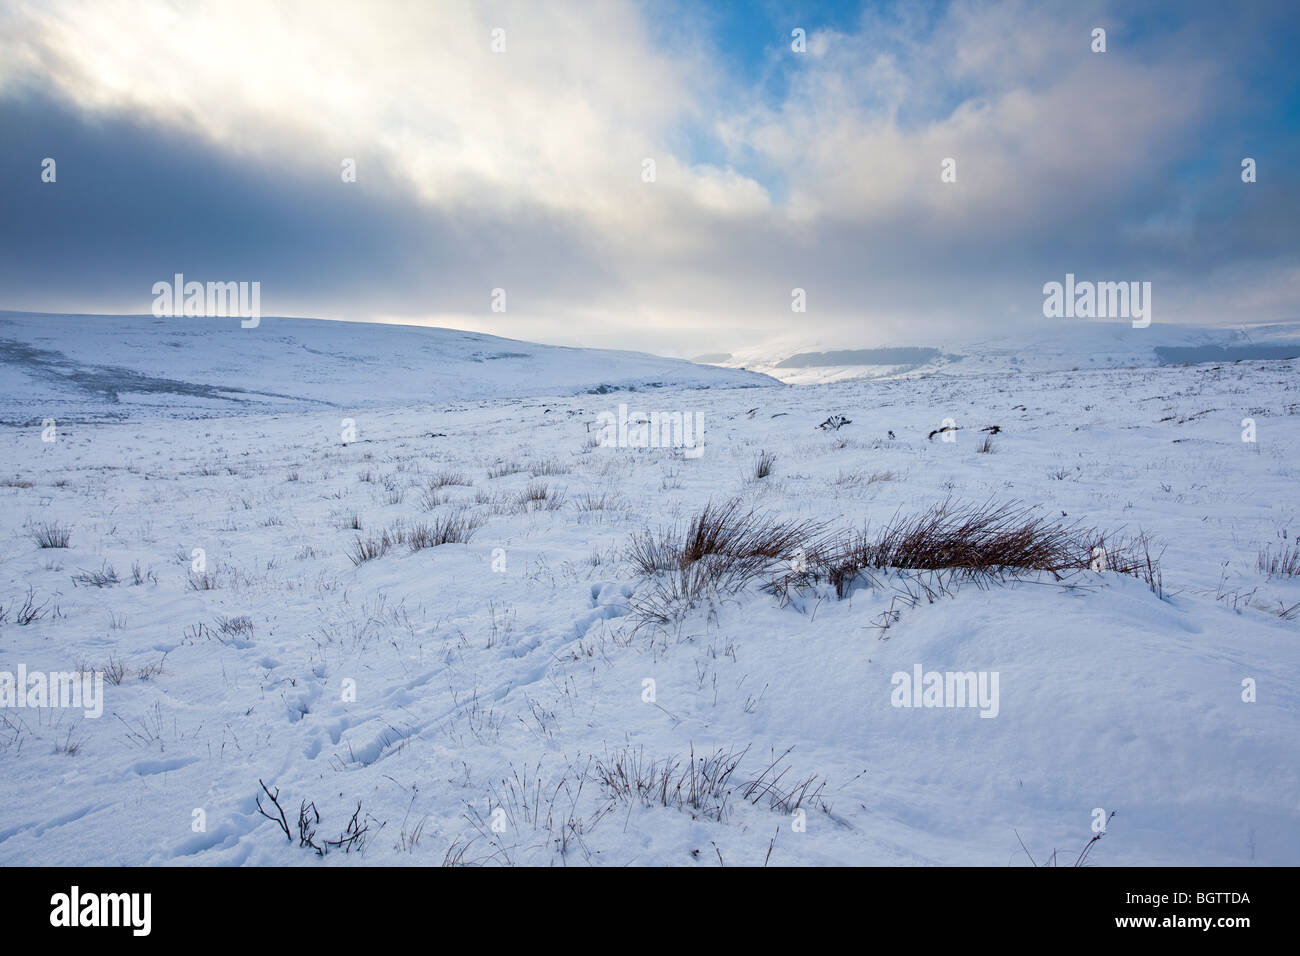 The North Yorkshire Moors completely covered in snow on a beautifully bright clear winter's day Stock Photo